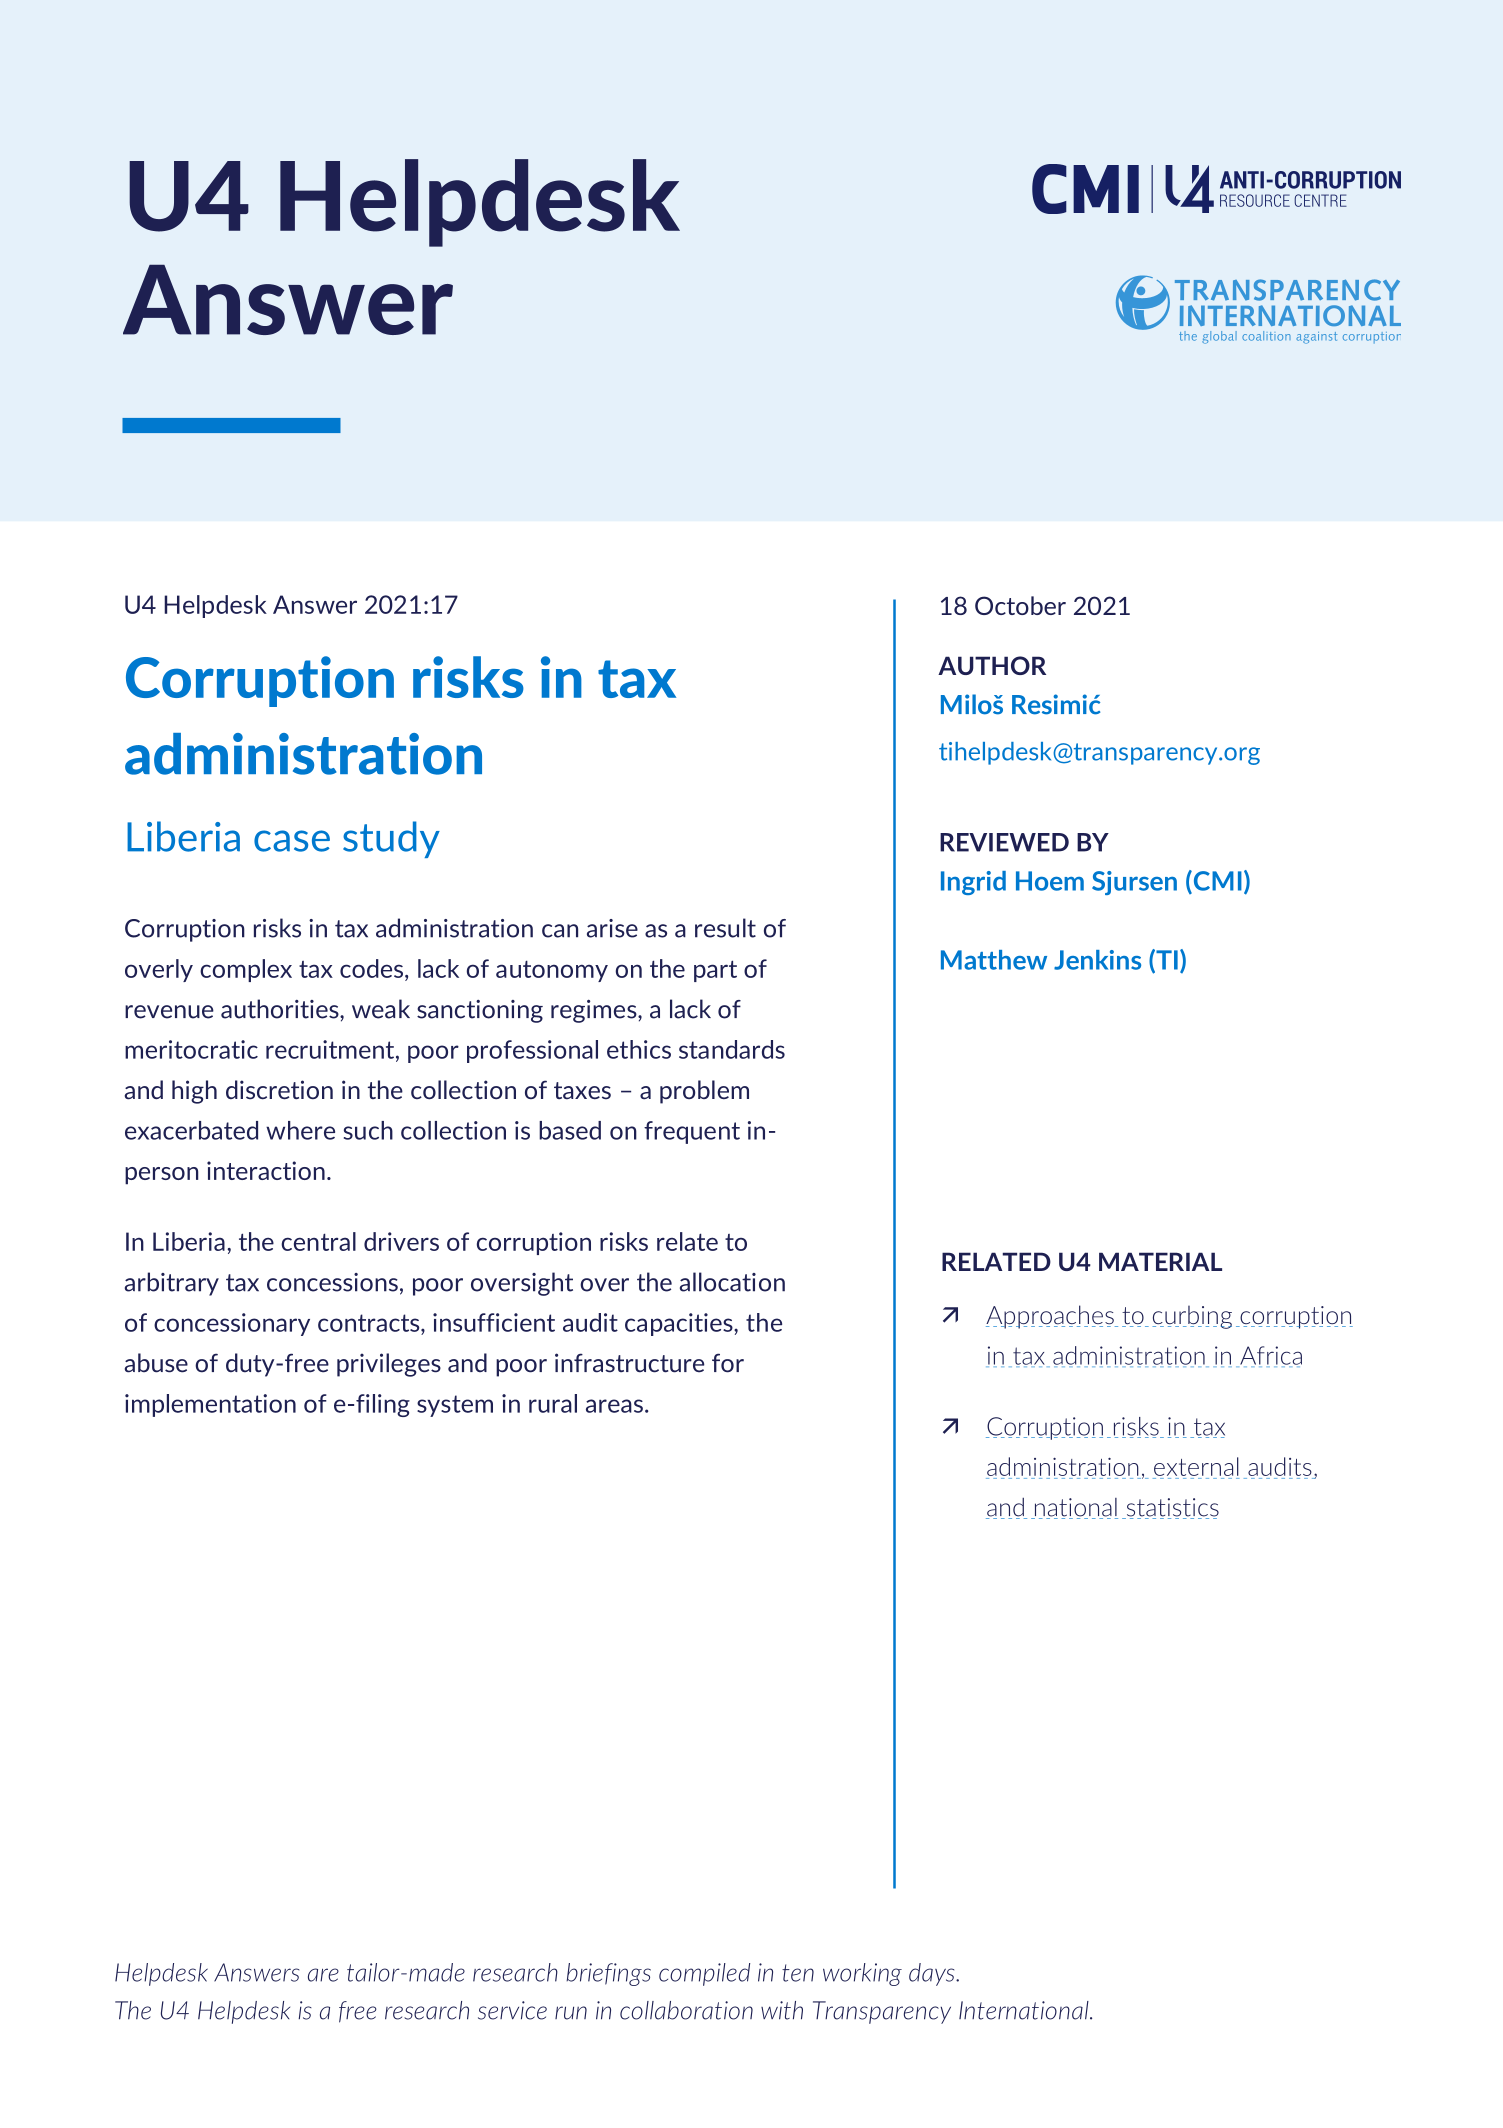 Corruption risks in tax administration